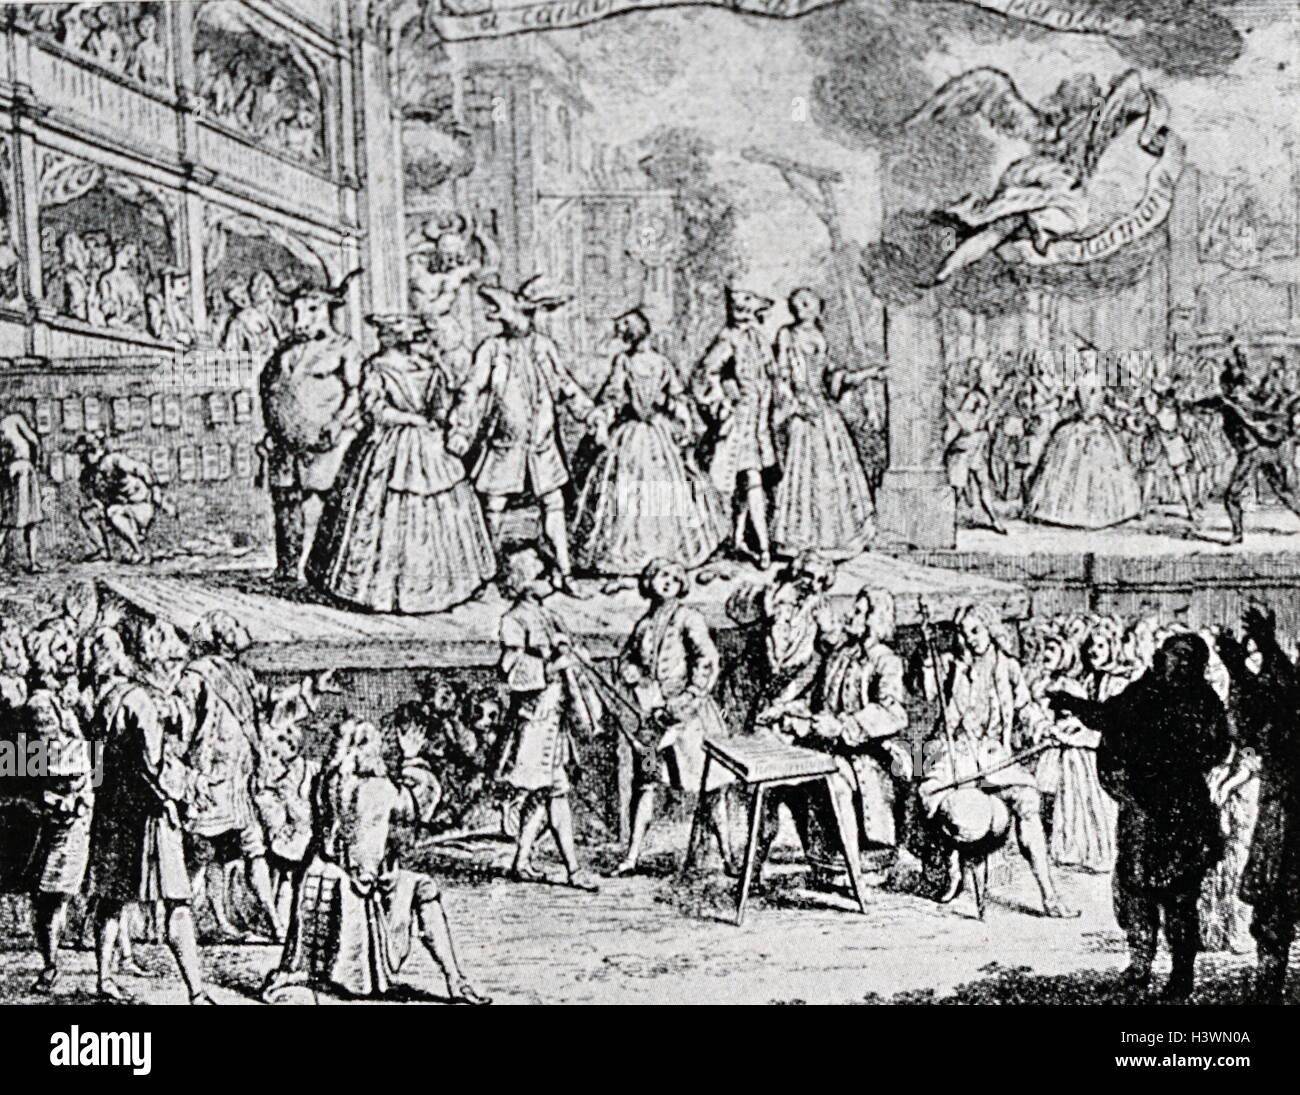 Engraving depicting a Beggar's Opera staged in London. Dated 18th Century Stock Photo